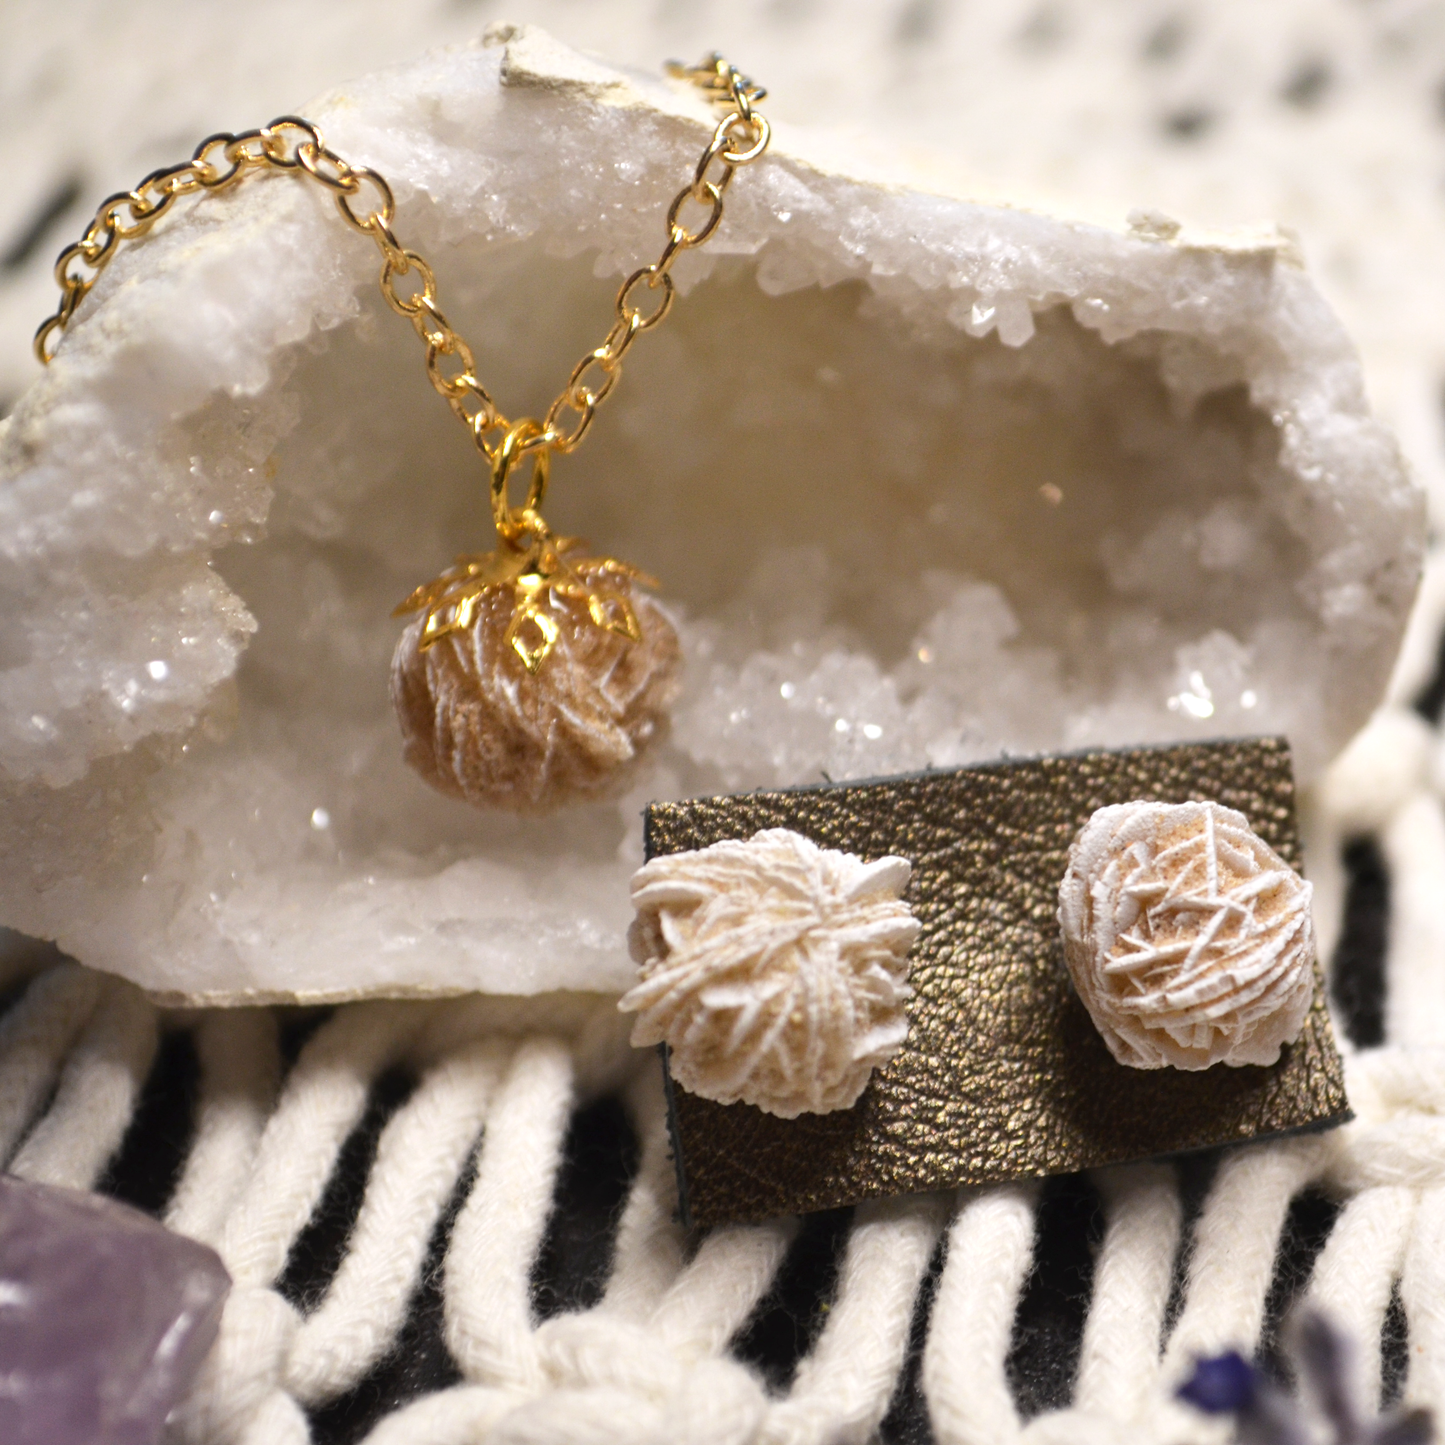 Desert Roses / Sand Roses Earrings, Necklace or Set for Protection